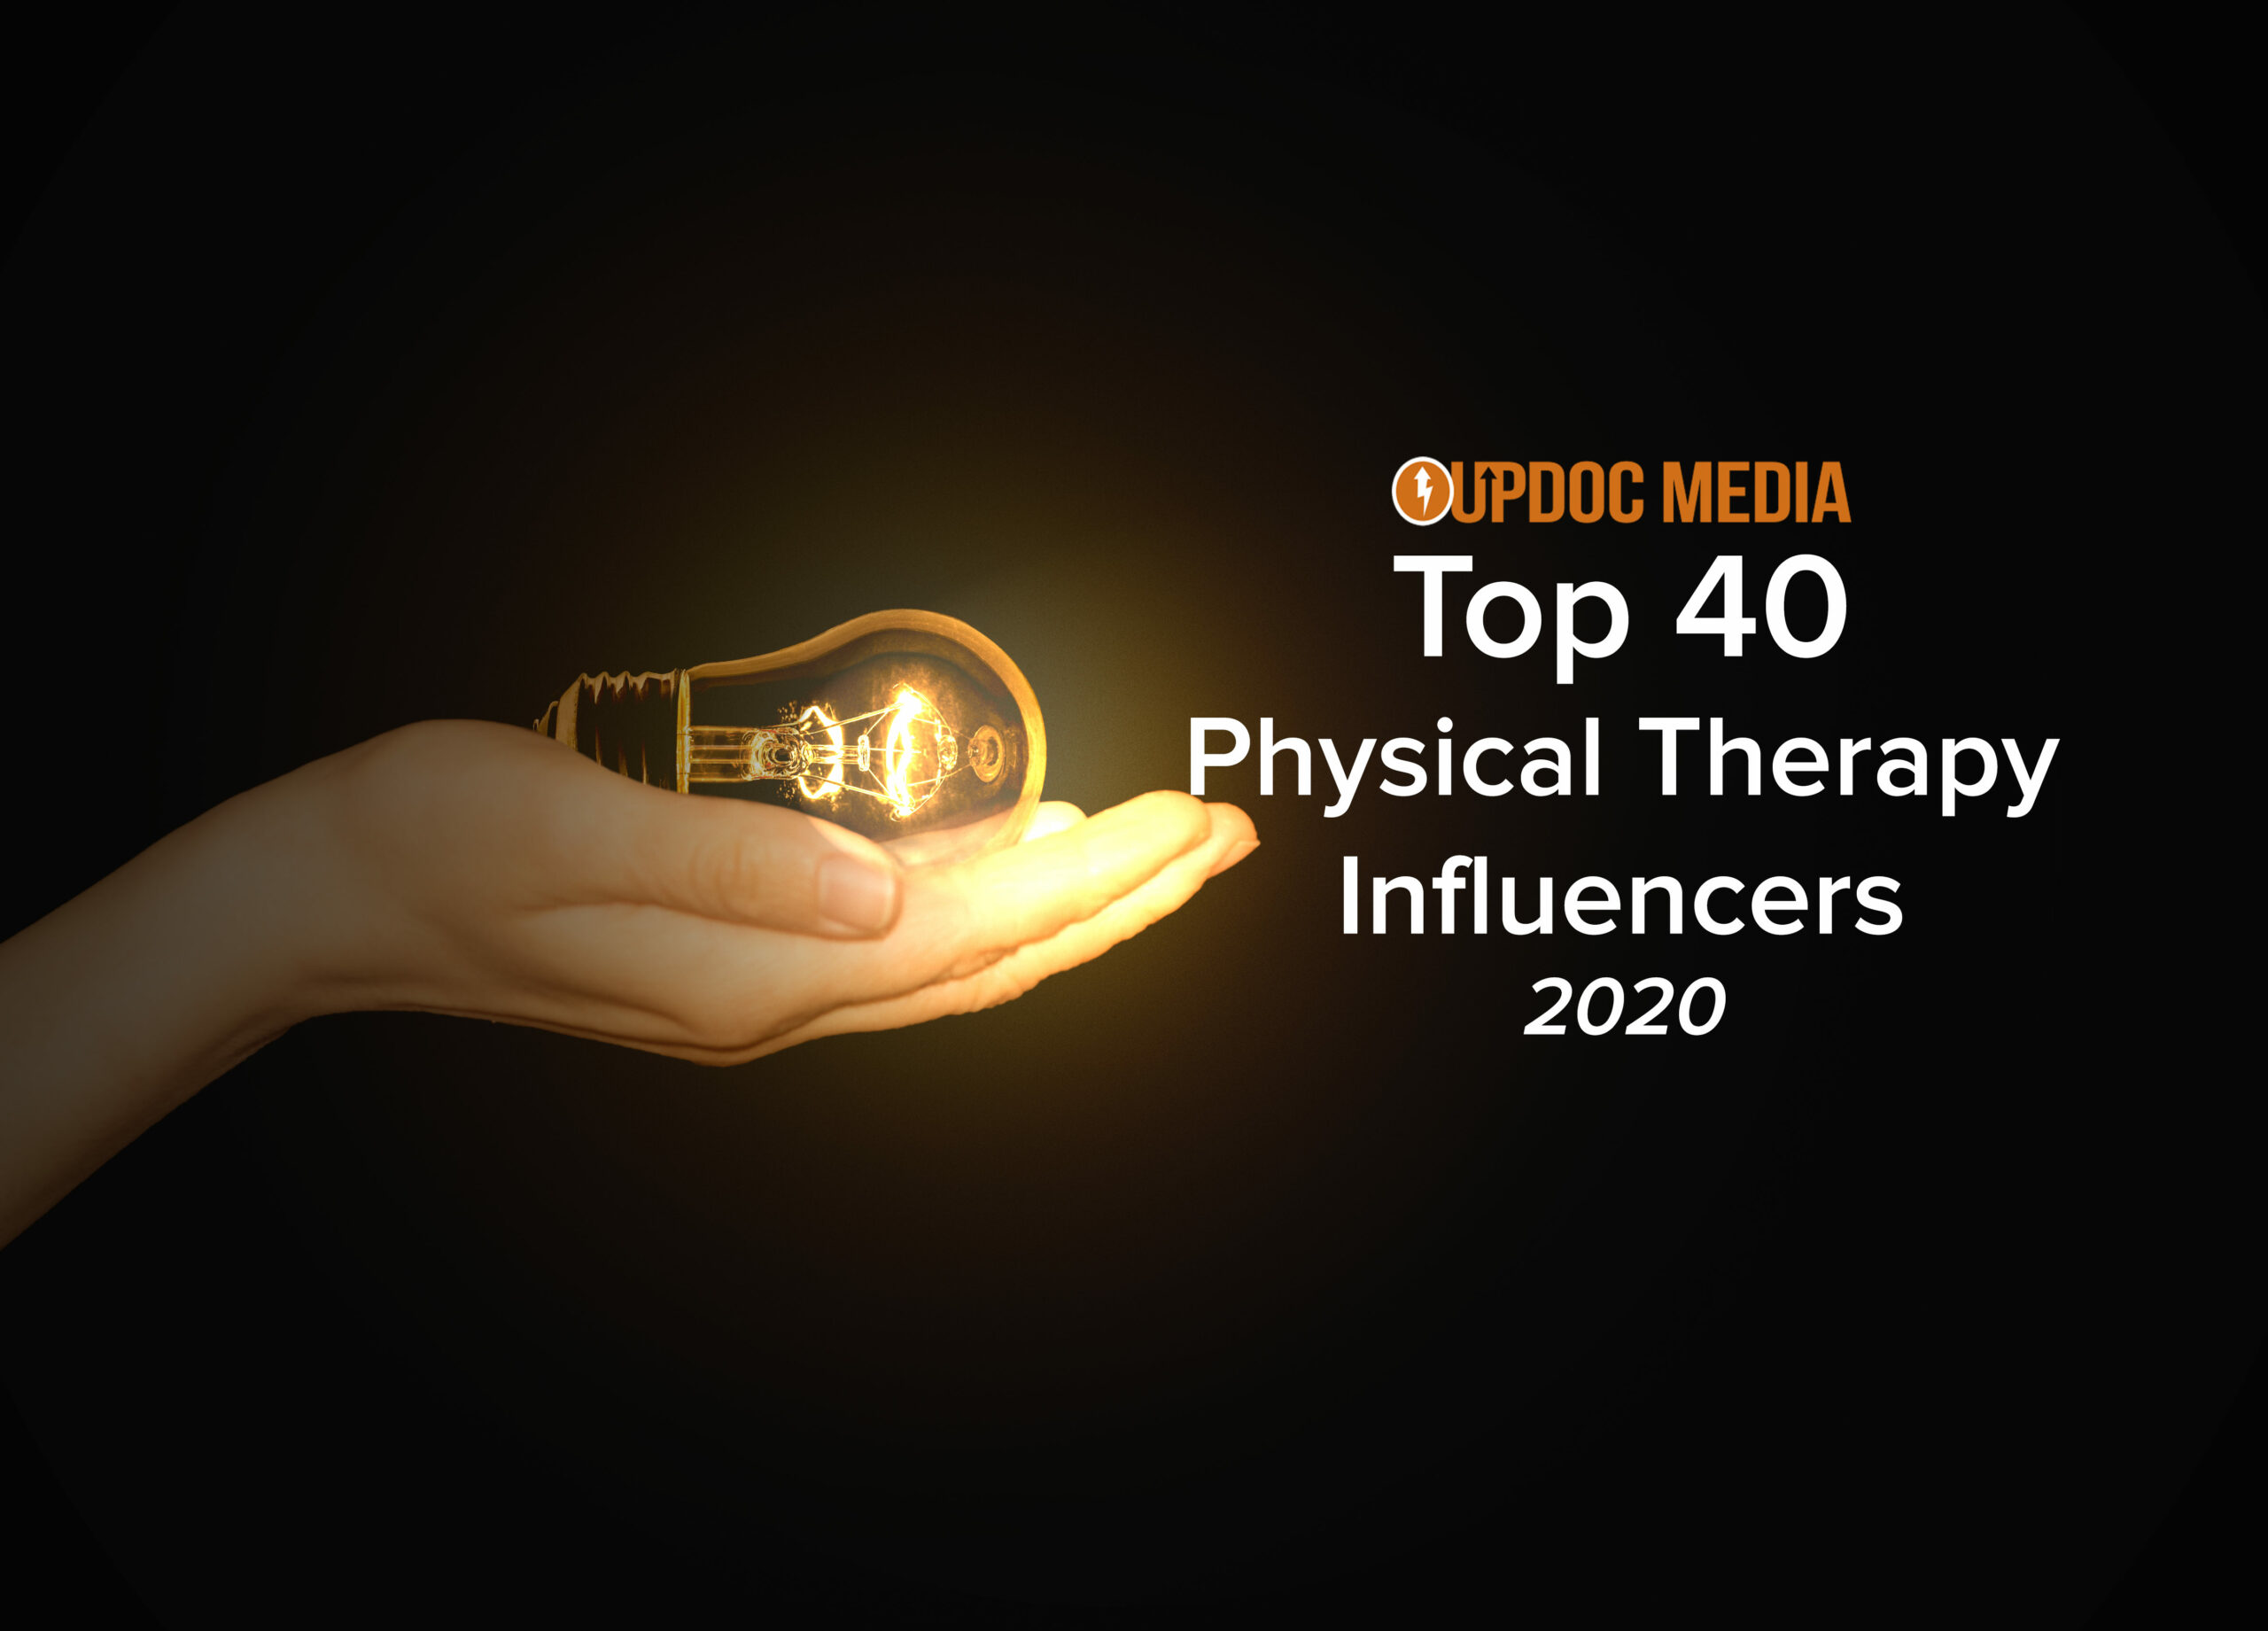 Top 40 physical therapy influencers 2020